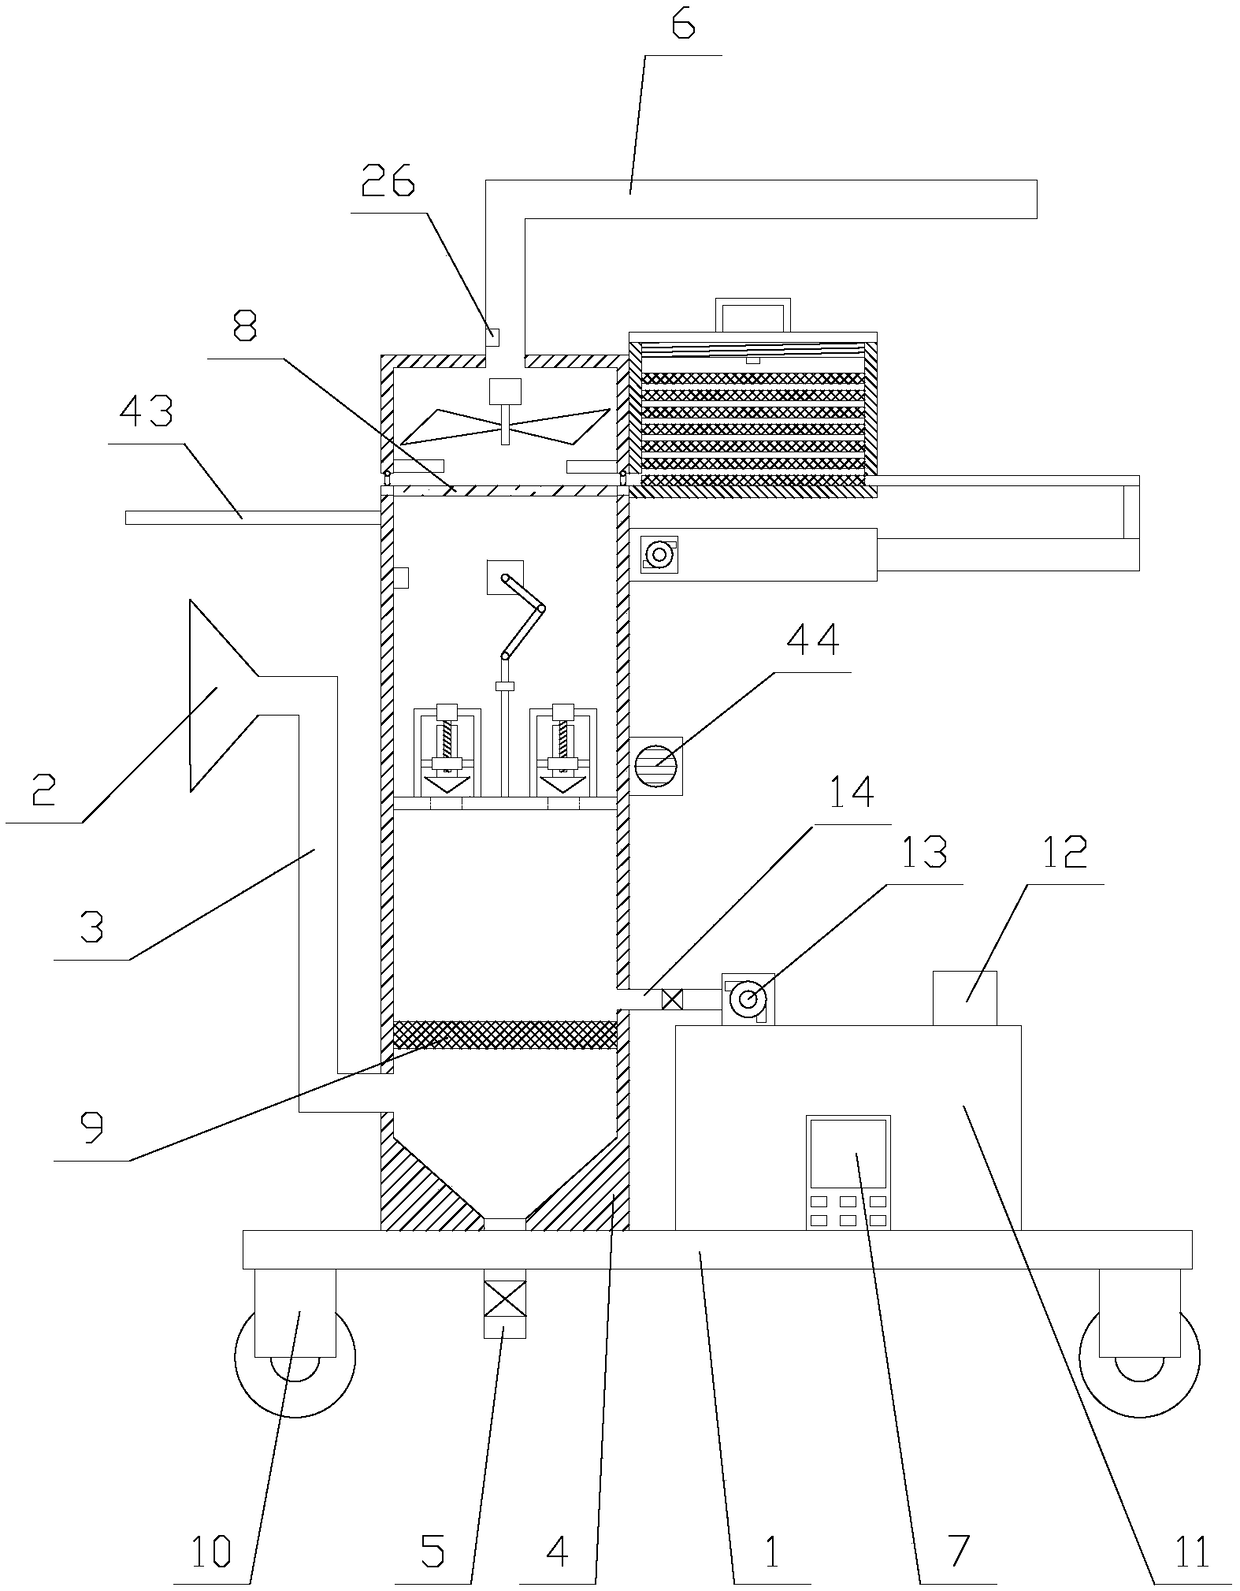 Welding fume purification device facilitating circulation and replacement